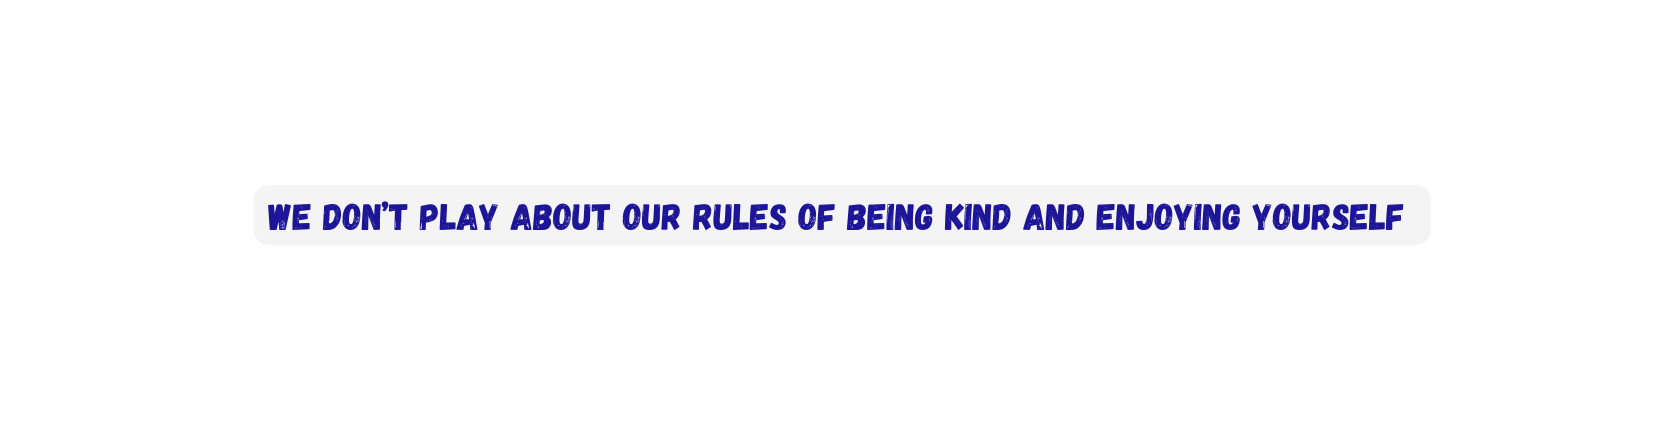 we don t play about our rules of being kind and enjoying yourself